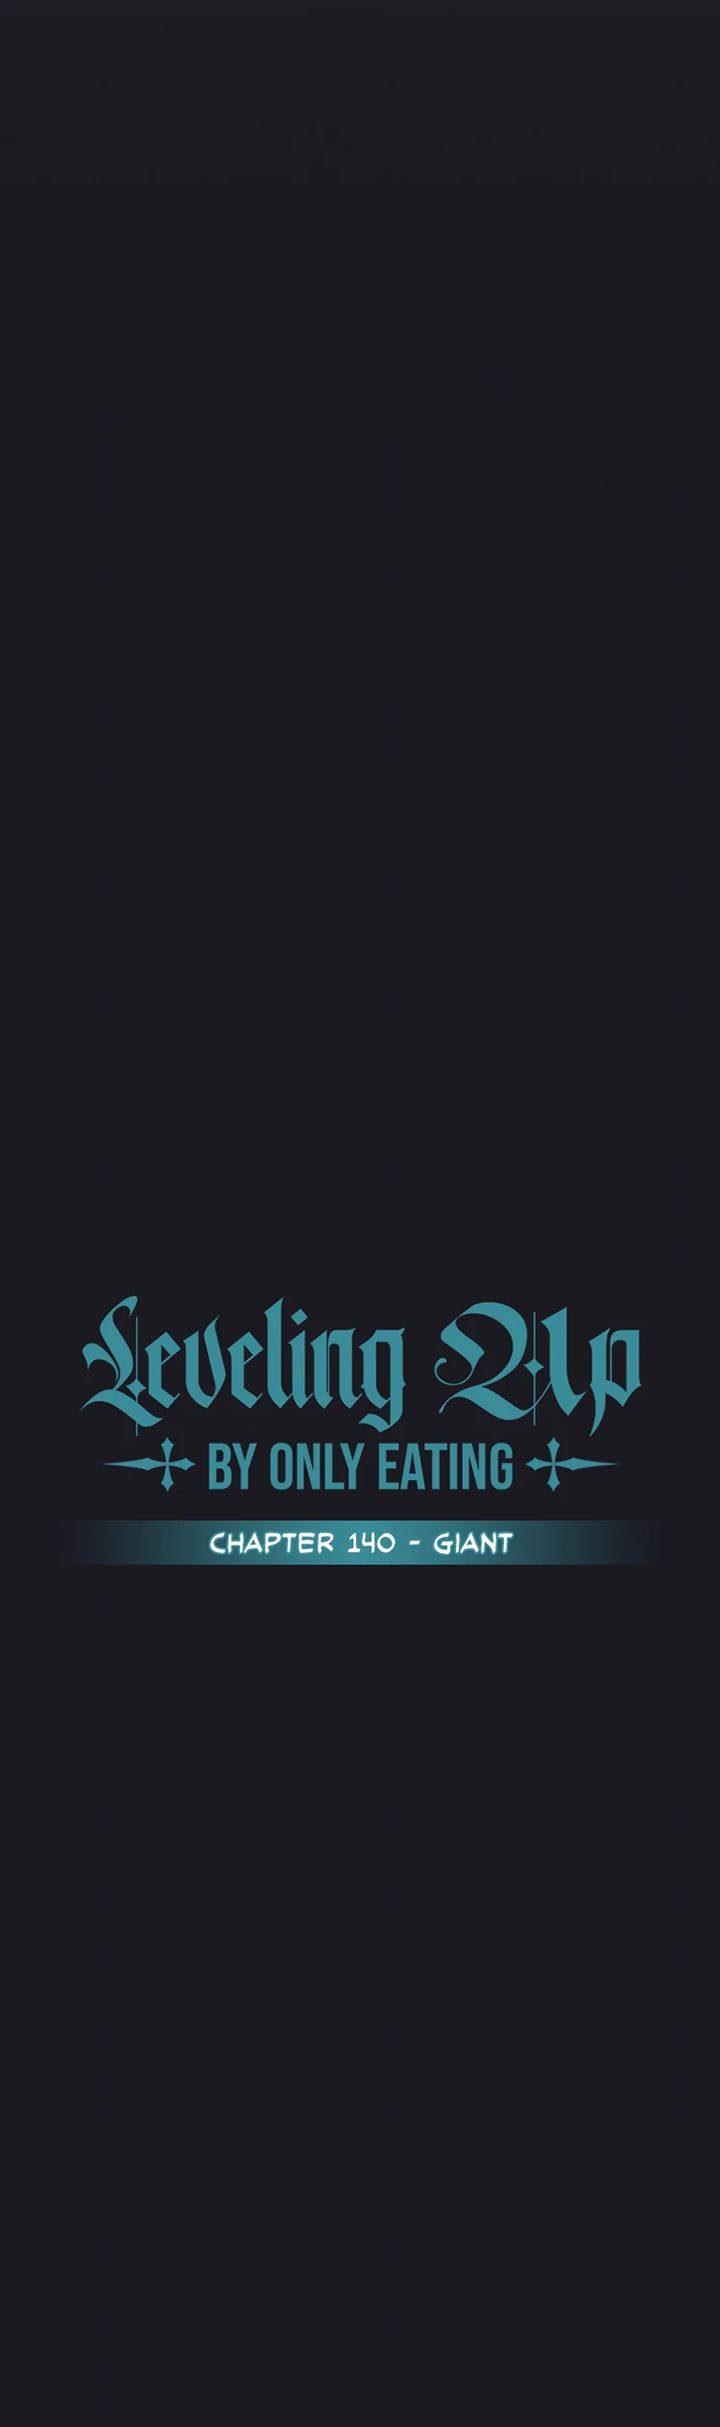 Leveling Up, by Only Eating! Chapter 140